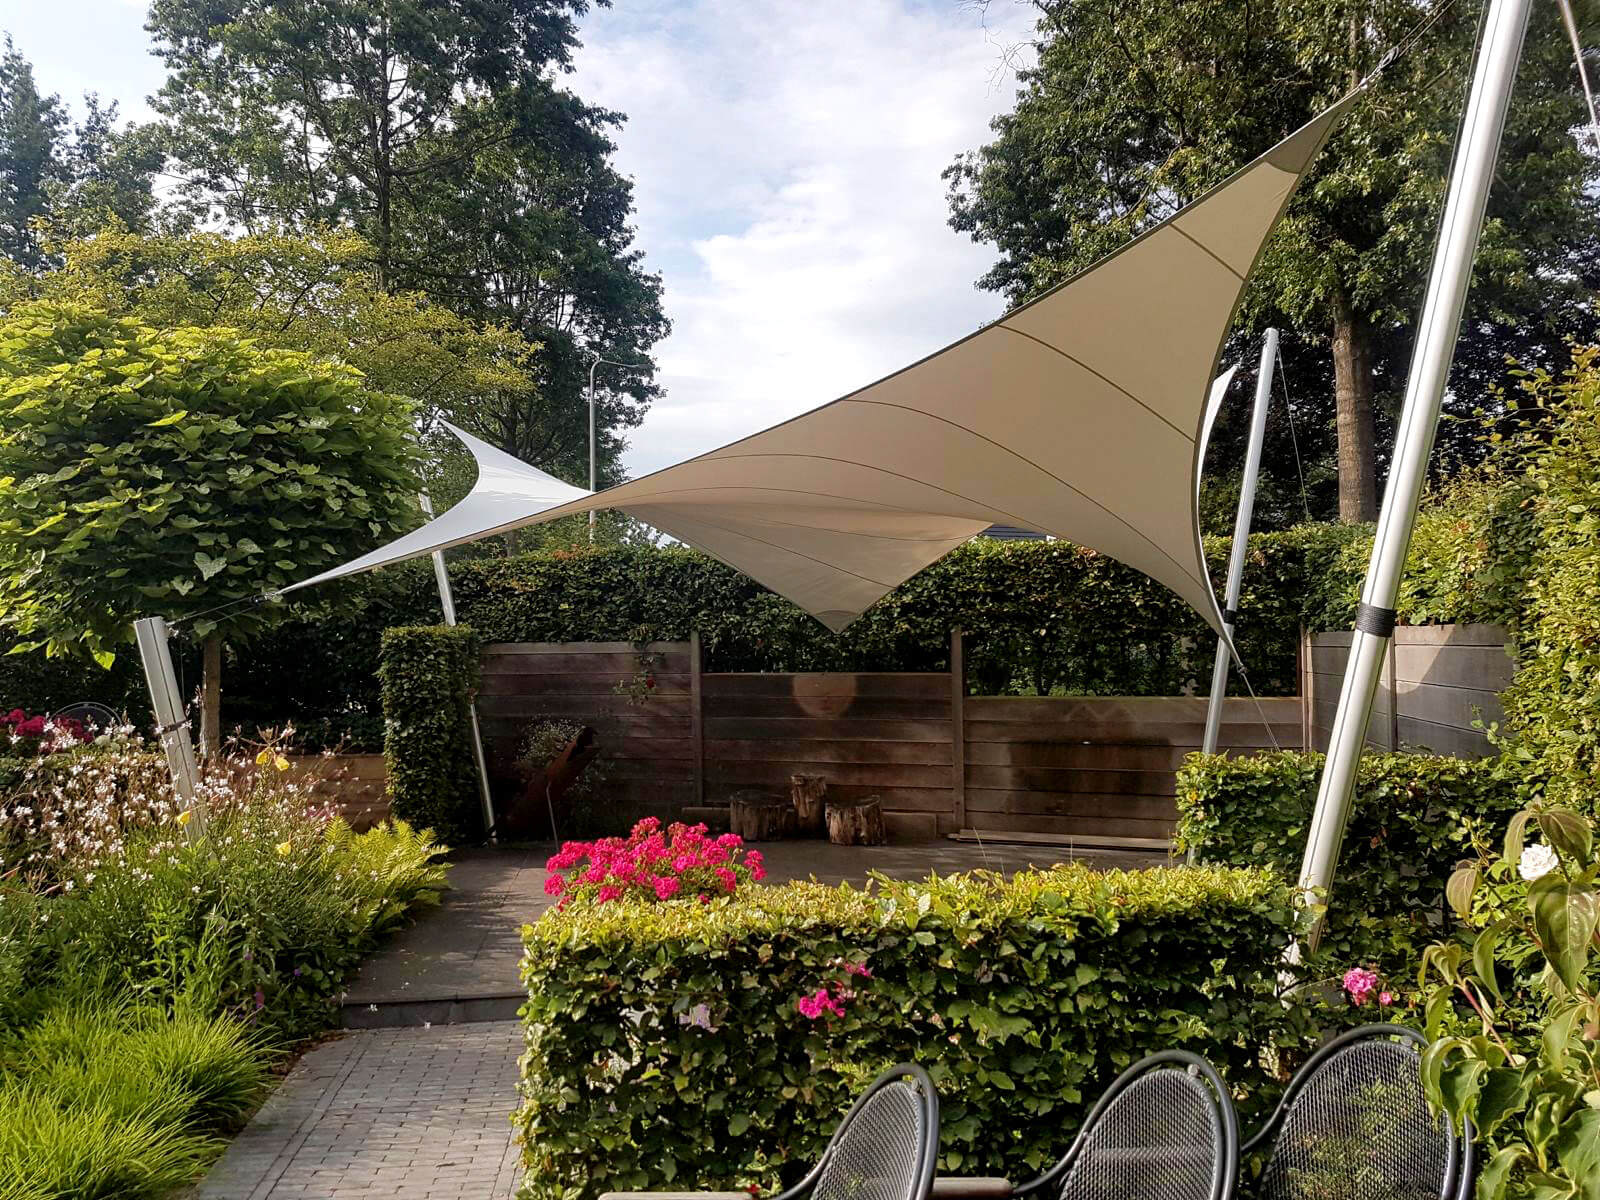 Waterproof Shade Sail-Outdoor Stretch Tent-Butterfly Gazebo Shade-Overlapping  Shade Sail-Triangular Sail-Square Sail-Rectangular Sail-Sun Shade-Deck and  Patio Shades for a Shop, Restaurant, Hotel, Resort, Office, Home, Church,  School, Factory, Hospital